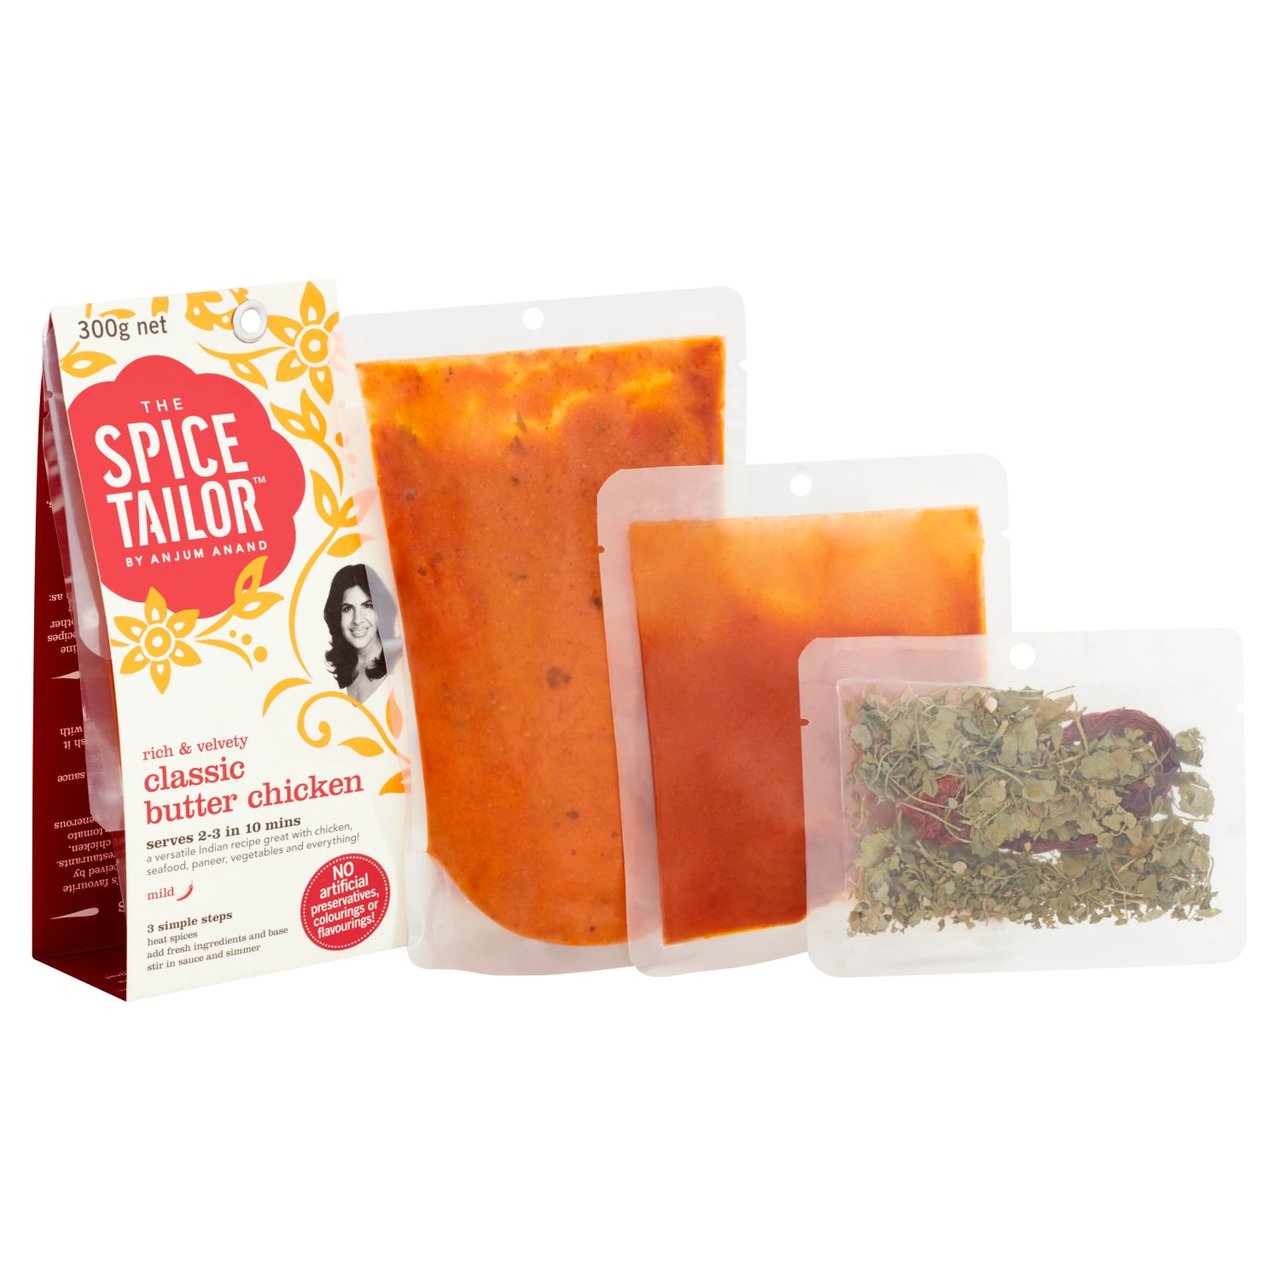 The Spice Tailor Butter Chicken Curry Kit 300g